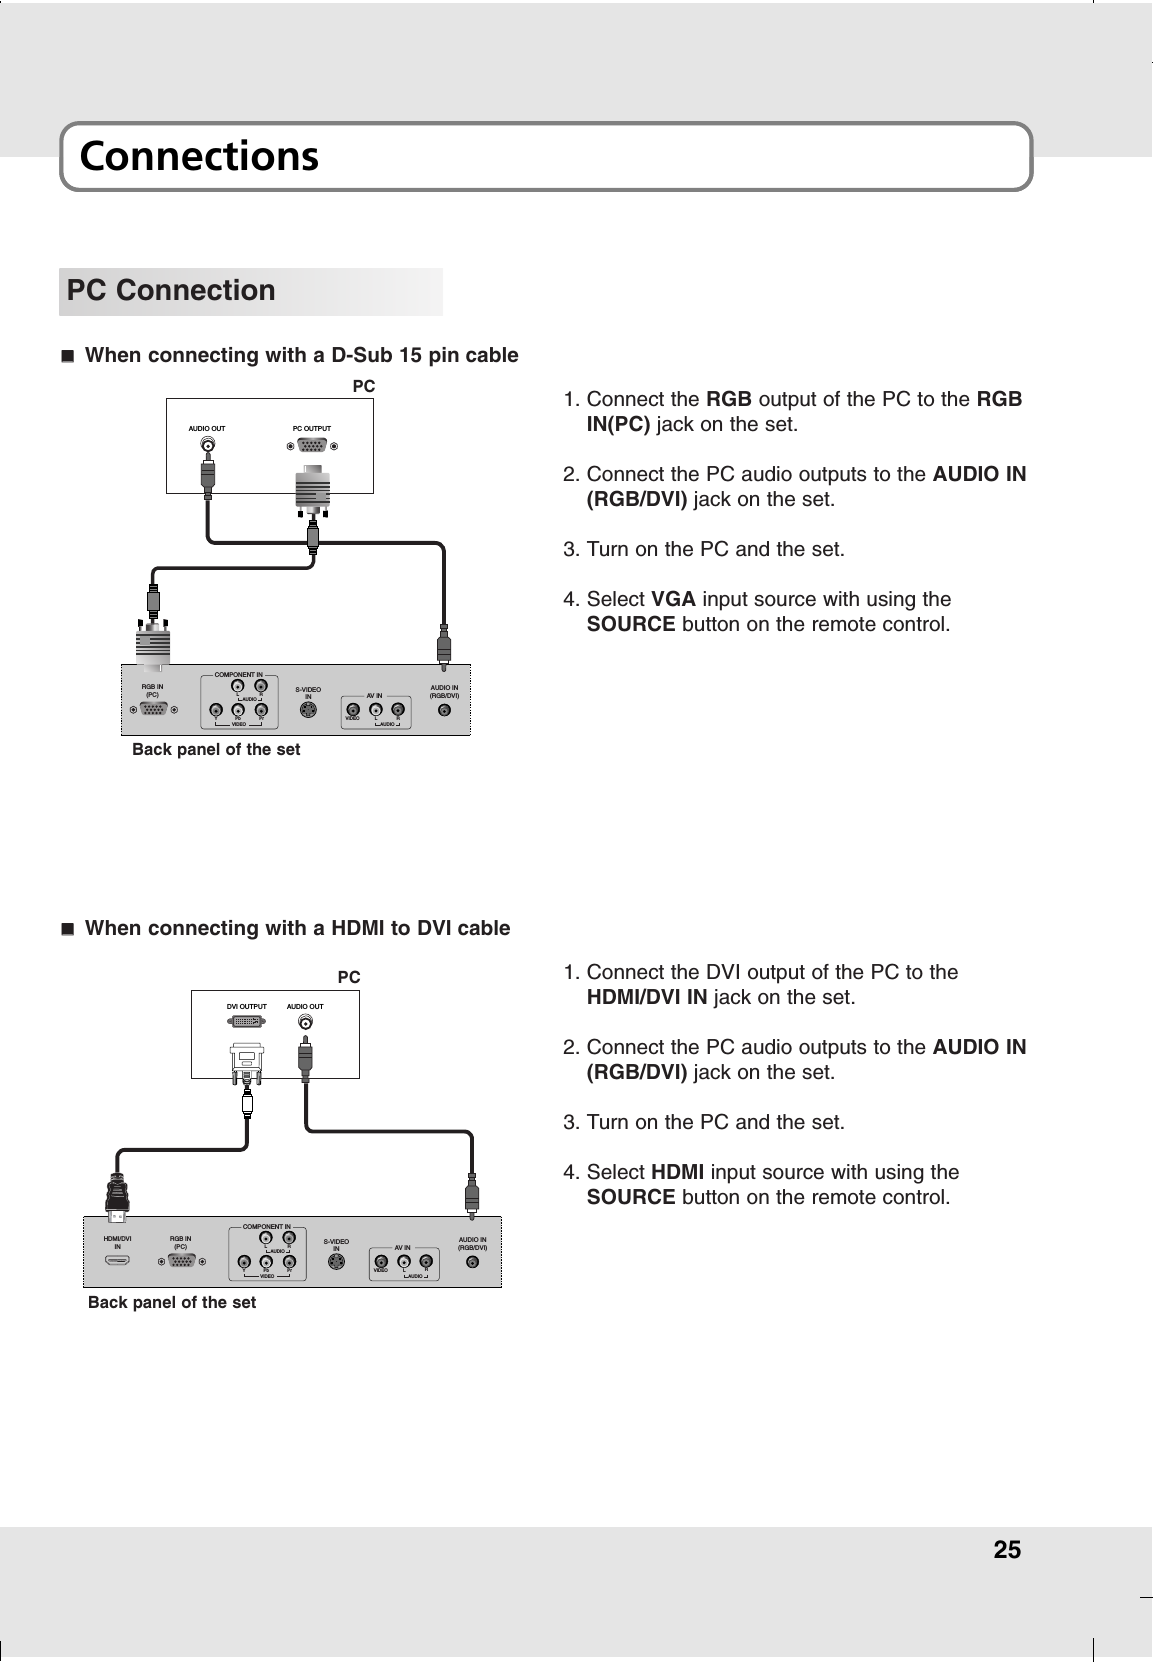 25ConnectionsPC ConnectionHDMI/DVIINRGB IN(PC)AUDIO IN(RGB/DVI)S-VIDEOINVIDEOYPb PrLRCOMPONENT INAUDIO AV INAUDIOLVIDEO RDVI OUTPUT AUDIO OUT1. Connect the DVI output of the PC to theHDMI/DVI IN jack on the set.2. Connect the PC audio outputs to the AUDIO IN(RGB/DVI) jack on the set.3. Turn on the PC and the set.4. Select HDMI input source with using theSOURCE button on the remote control.AAWhen connecting with a HDMI to DVI cableRGB IN(PC)AUDIO IN(RGB/DVI)S-VIDEOINVIDEOYPb PrLRCOMPONENT INAUDIO AV INAUDIOLVIDEO RAUDIO OUT PC OUTPUT1. Connect the RGB output of the PC to the RGBIN(PC) jack on the set.2. Connect the PC audio outputs to the AUDIO IN(RGB/DVI) jack on the set.3. Turn on the PC and the set.4. Select VGA input source with using theSOURCE button on the remote control.AAWhen connecting with a D-Sub 15 pin cablePCBack panel of the setPCBack panel of the set